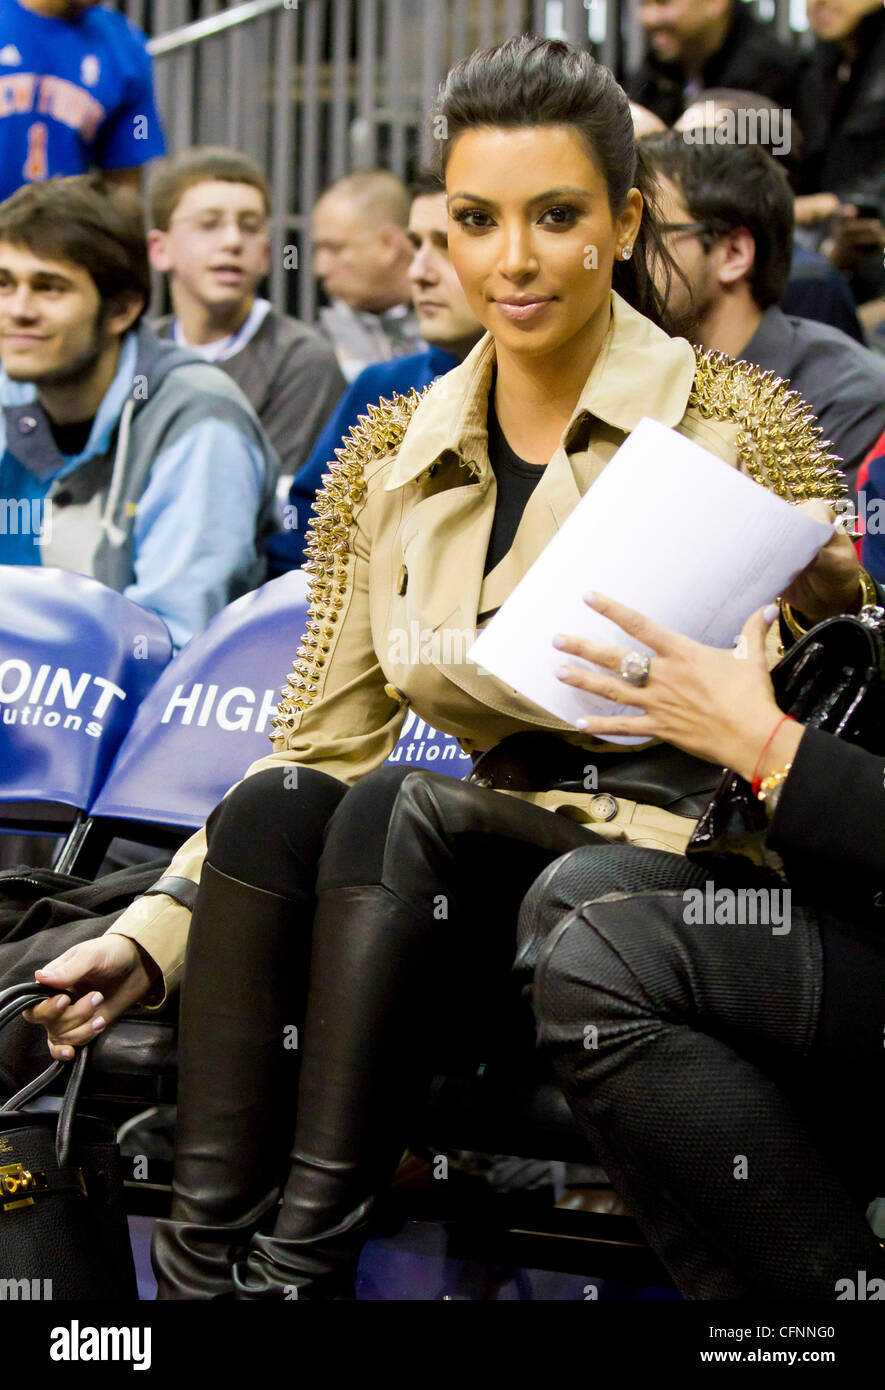 Kim Kardashian sits courtside during the NBA game between the New York  Knicks and the New Jersey Nets at the Prudential Center in Newark New Jersey,  USA - 12.02.11 Stock Photo - Alamy